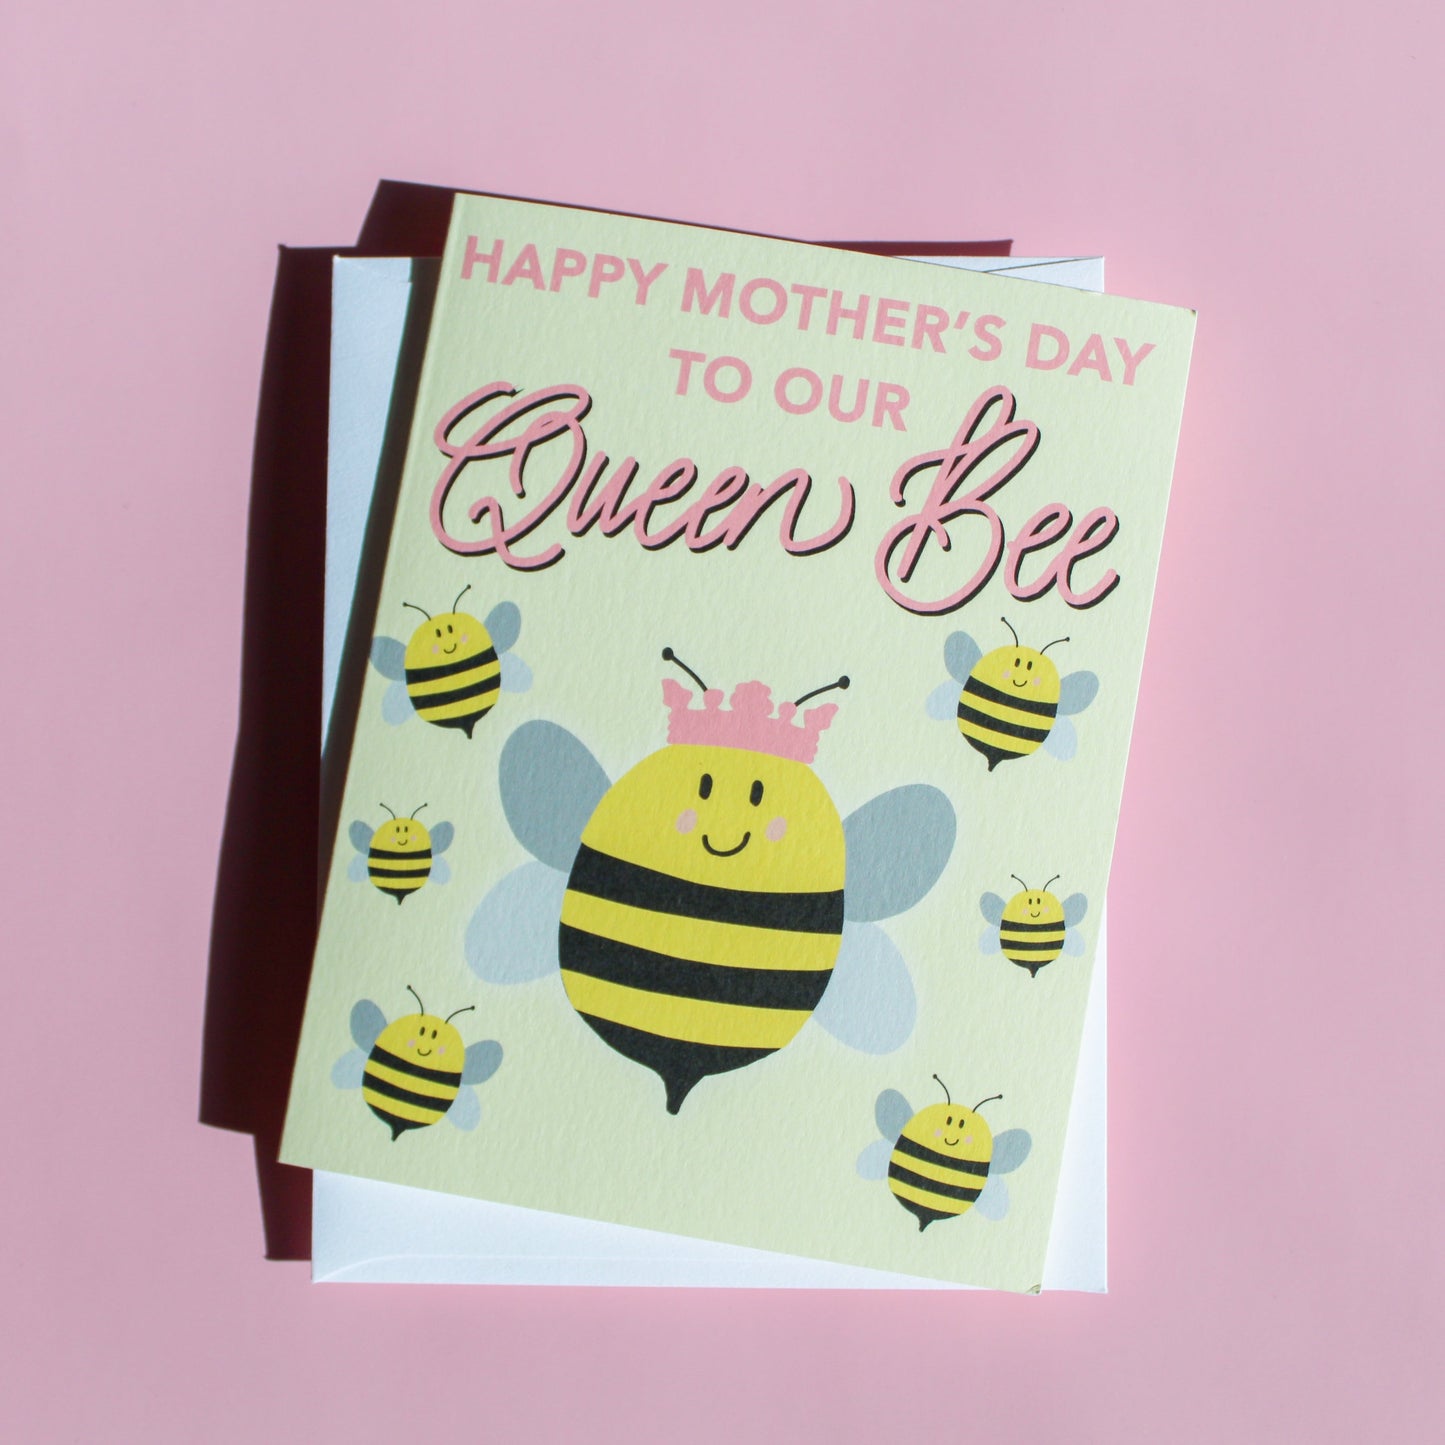 Our "Happy Mother's Day to our Queen Bee!" Mother's Day card features hand drawn queen bees on a yellow background - it is perfect for a mom, grandmother or any matriarch! Each card is folded to 4.25" tall by 5.5" wide, is blank inside and comes with a matching white envelope. Cards are packaged in cellophane sleeves.